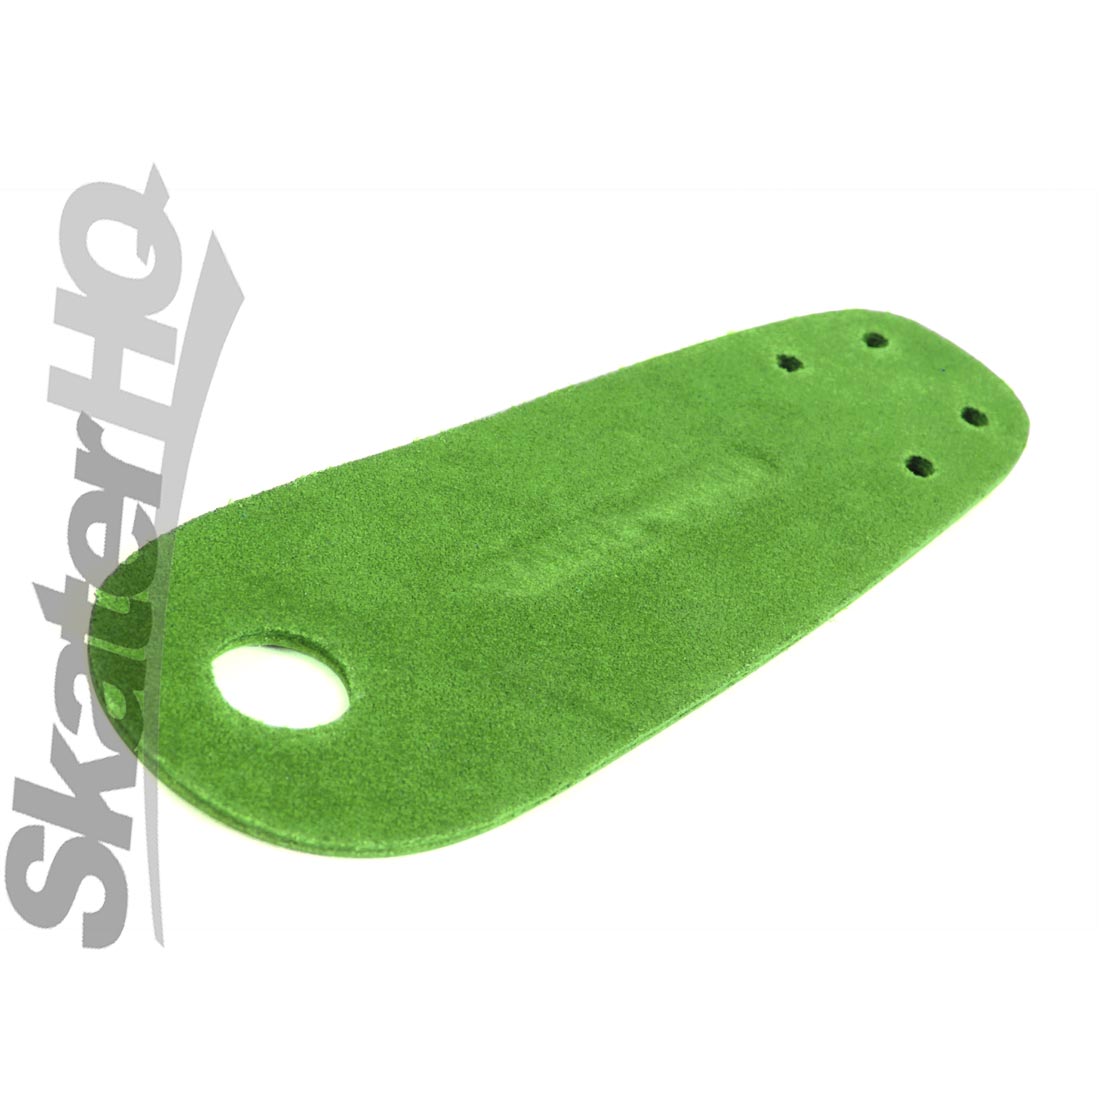 Sure-Grip Toe Guards - Green Roller Skate Hardware and Parts